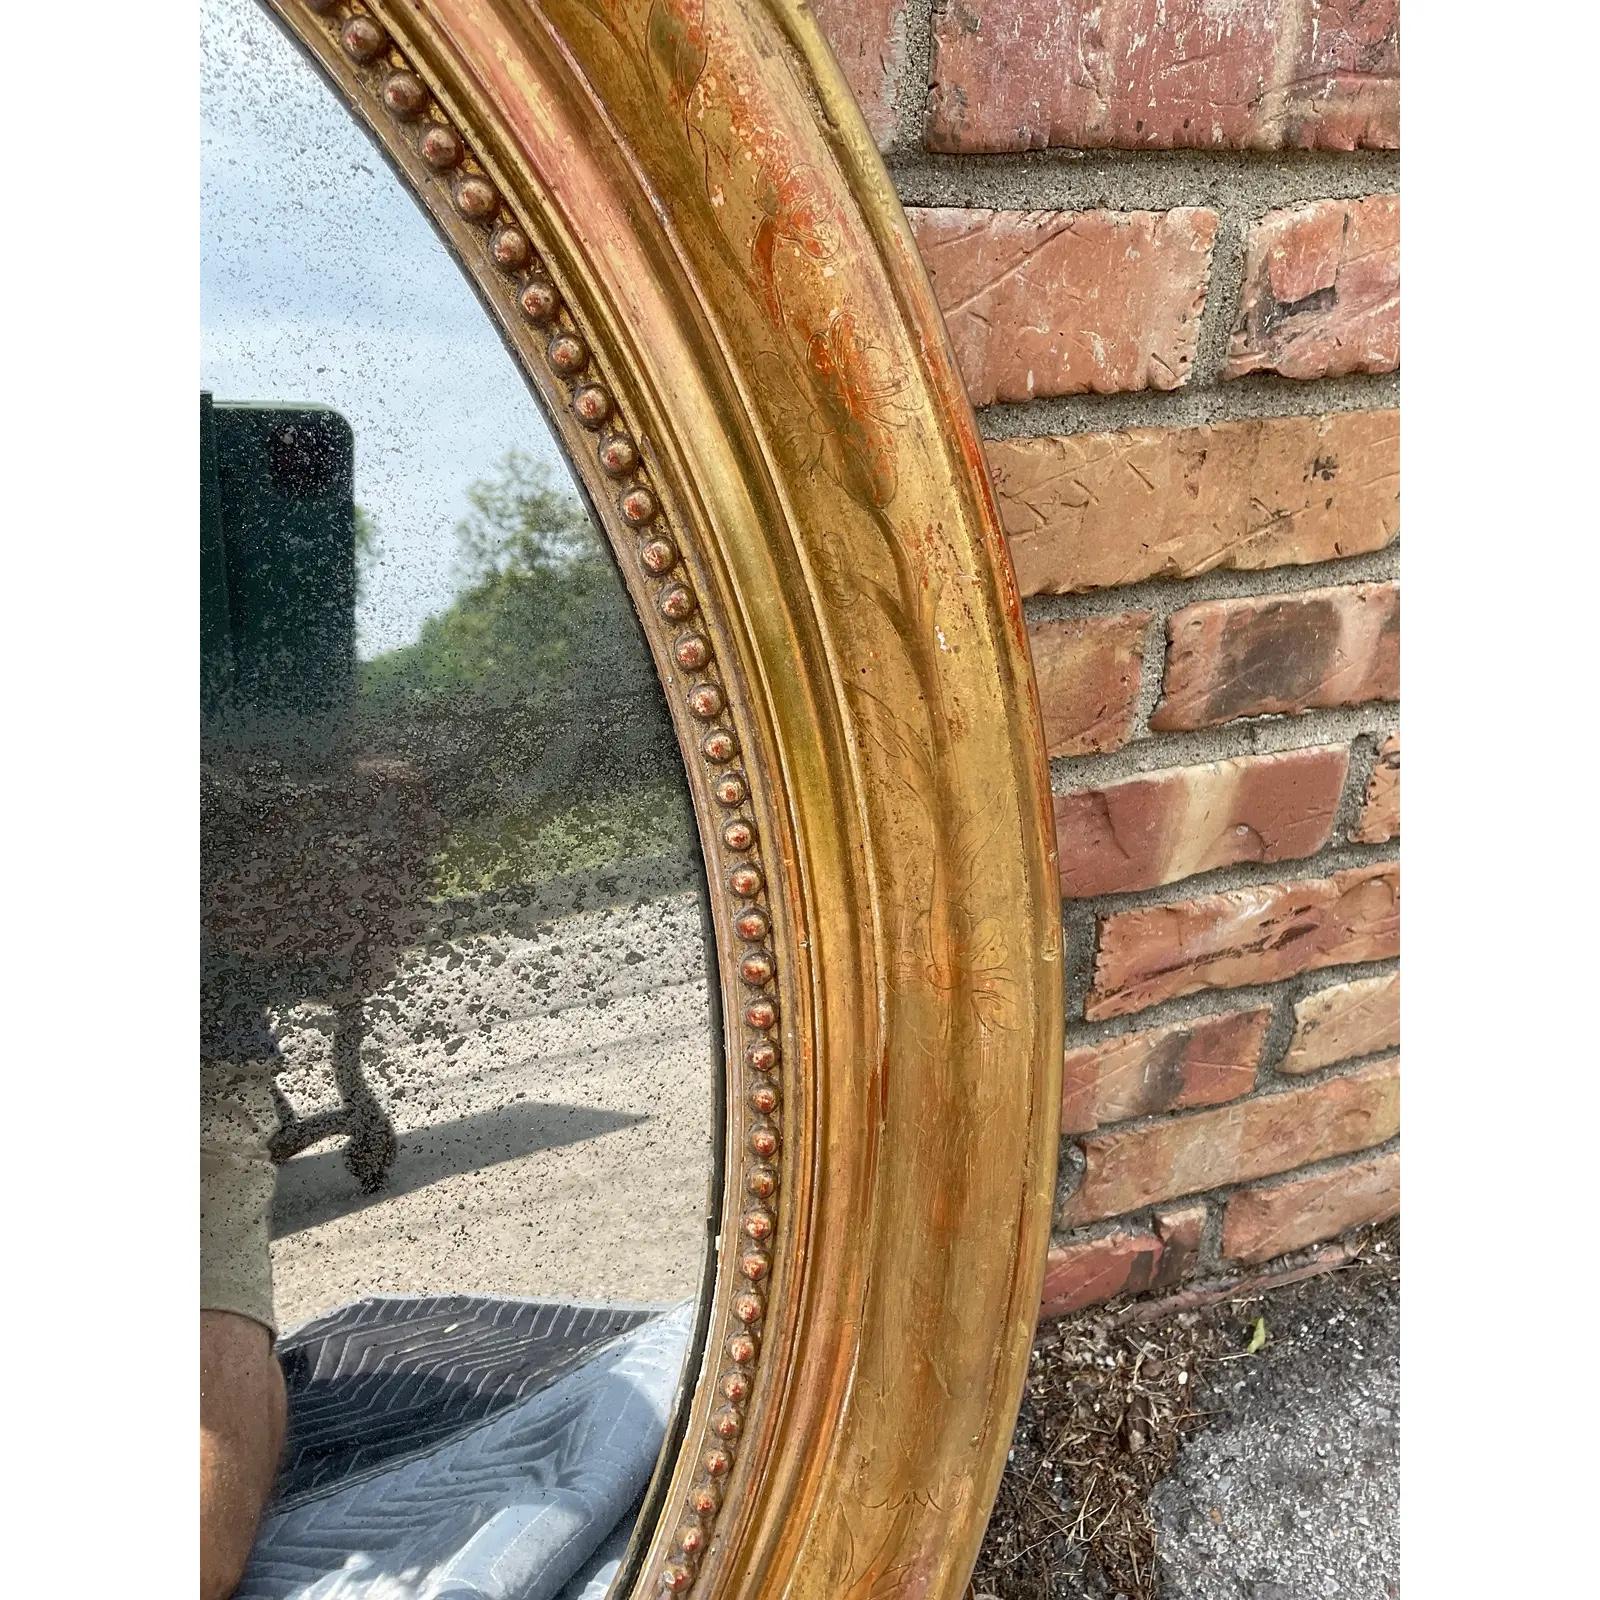 This is a beautiful 19th century French mirror. It features an intricate hand carved floral and leaf design on the edges and a beaded inner border. Mirrors of this style are quite versatile and can be beautifully displayed in traditional or